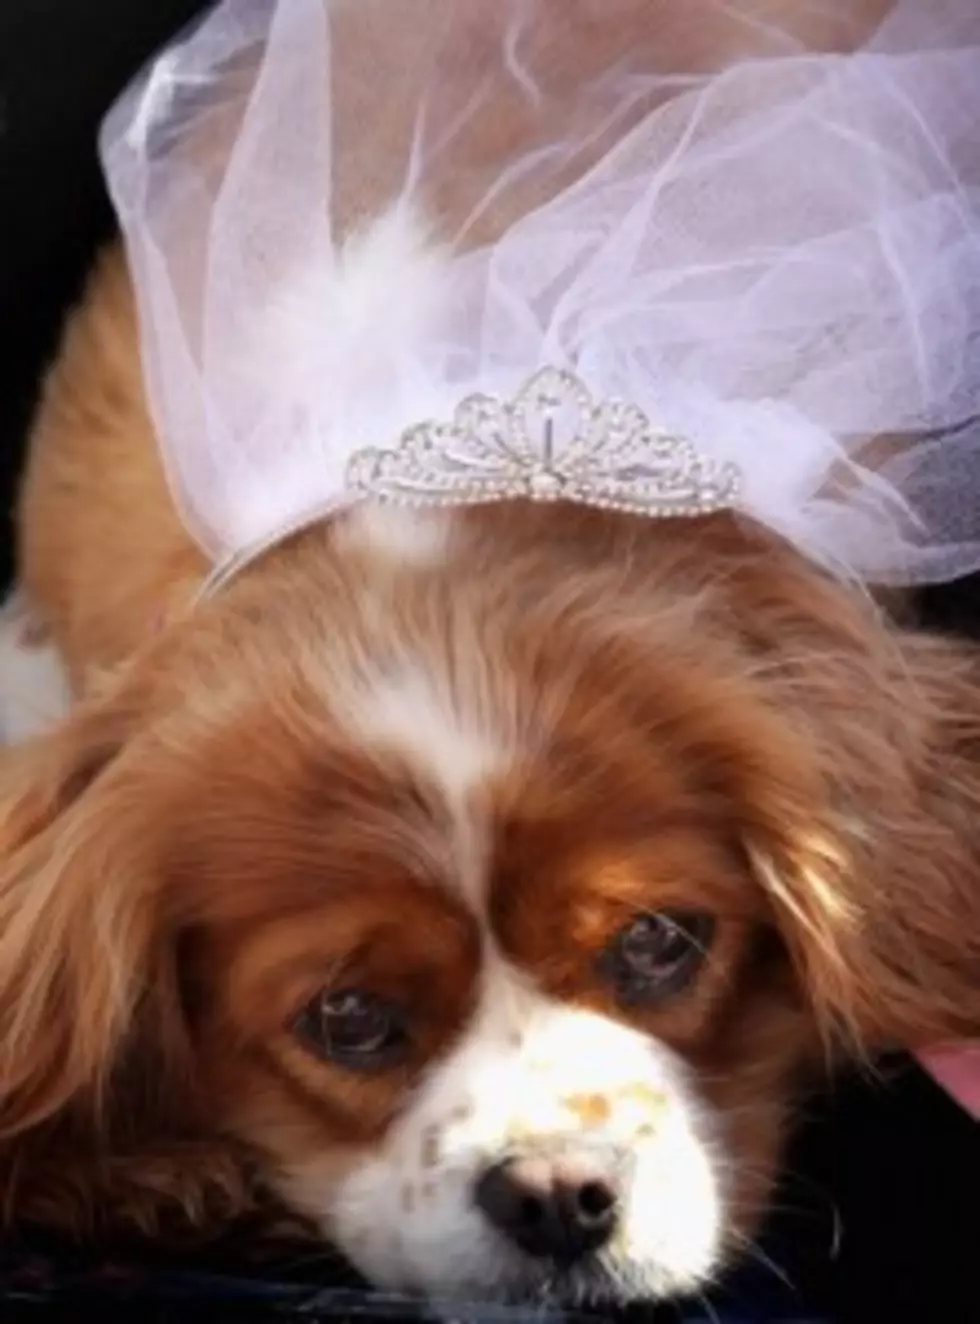 Woman Shells out $250K for Dog Wedding